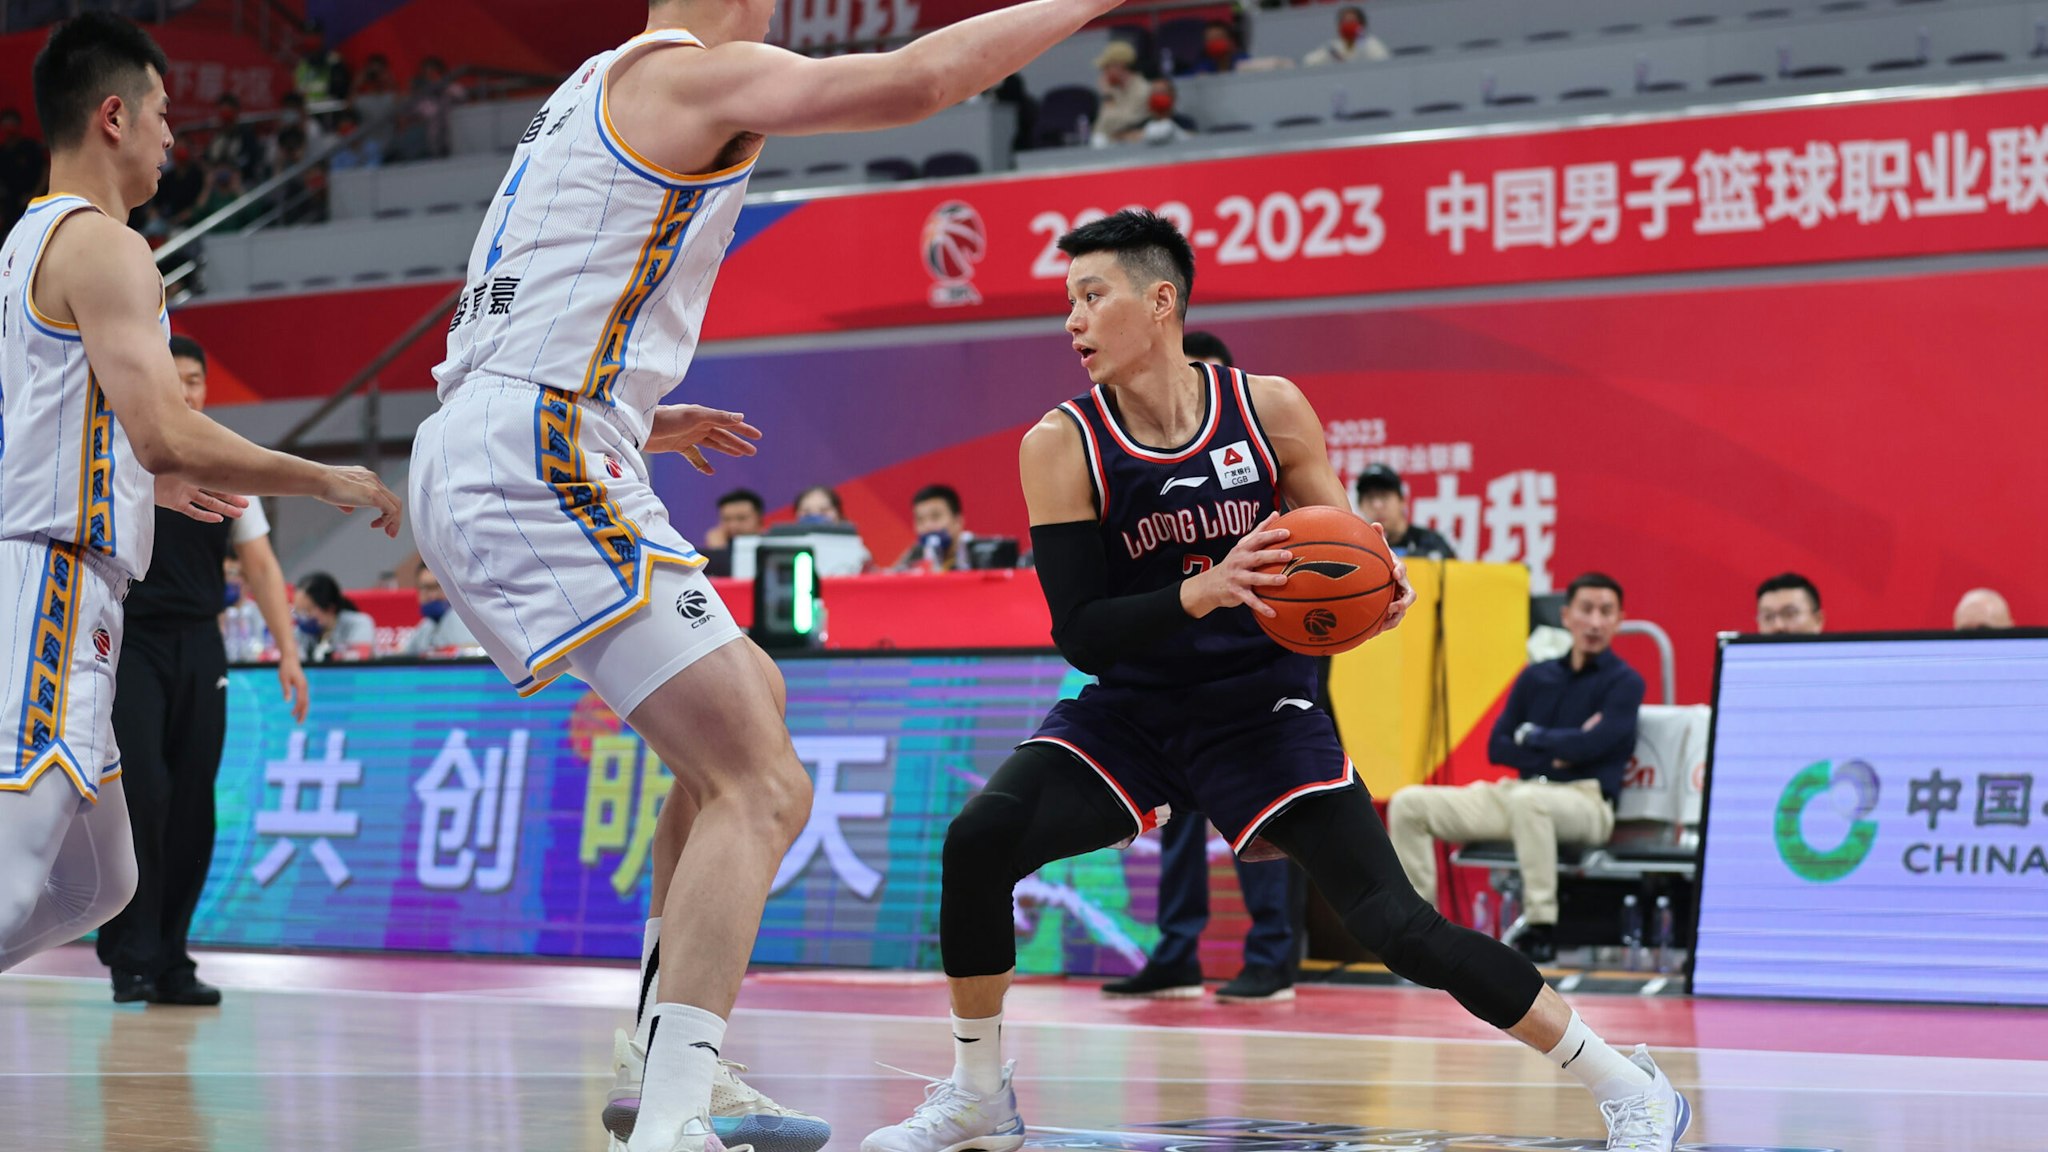 Former NBA guard Jeremy Lin, who now plays pro basketball in China, was fined Friday for criticizing the country’s quarantining of athletes amid widespread demonstrations against Beijing’s draconian COVID lockdowns.